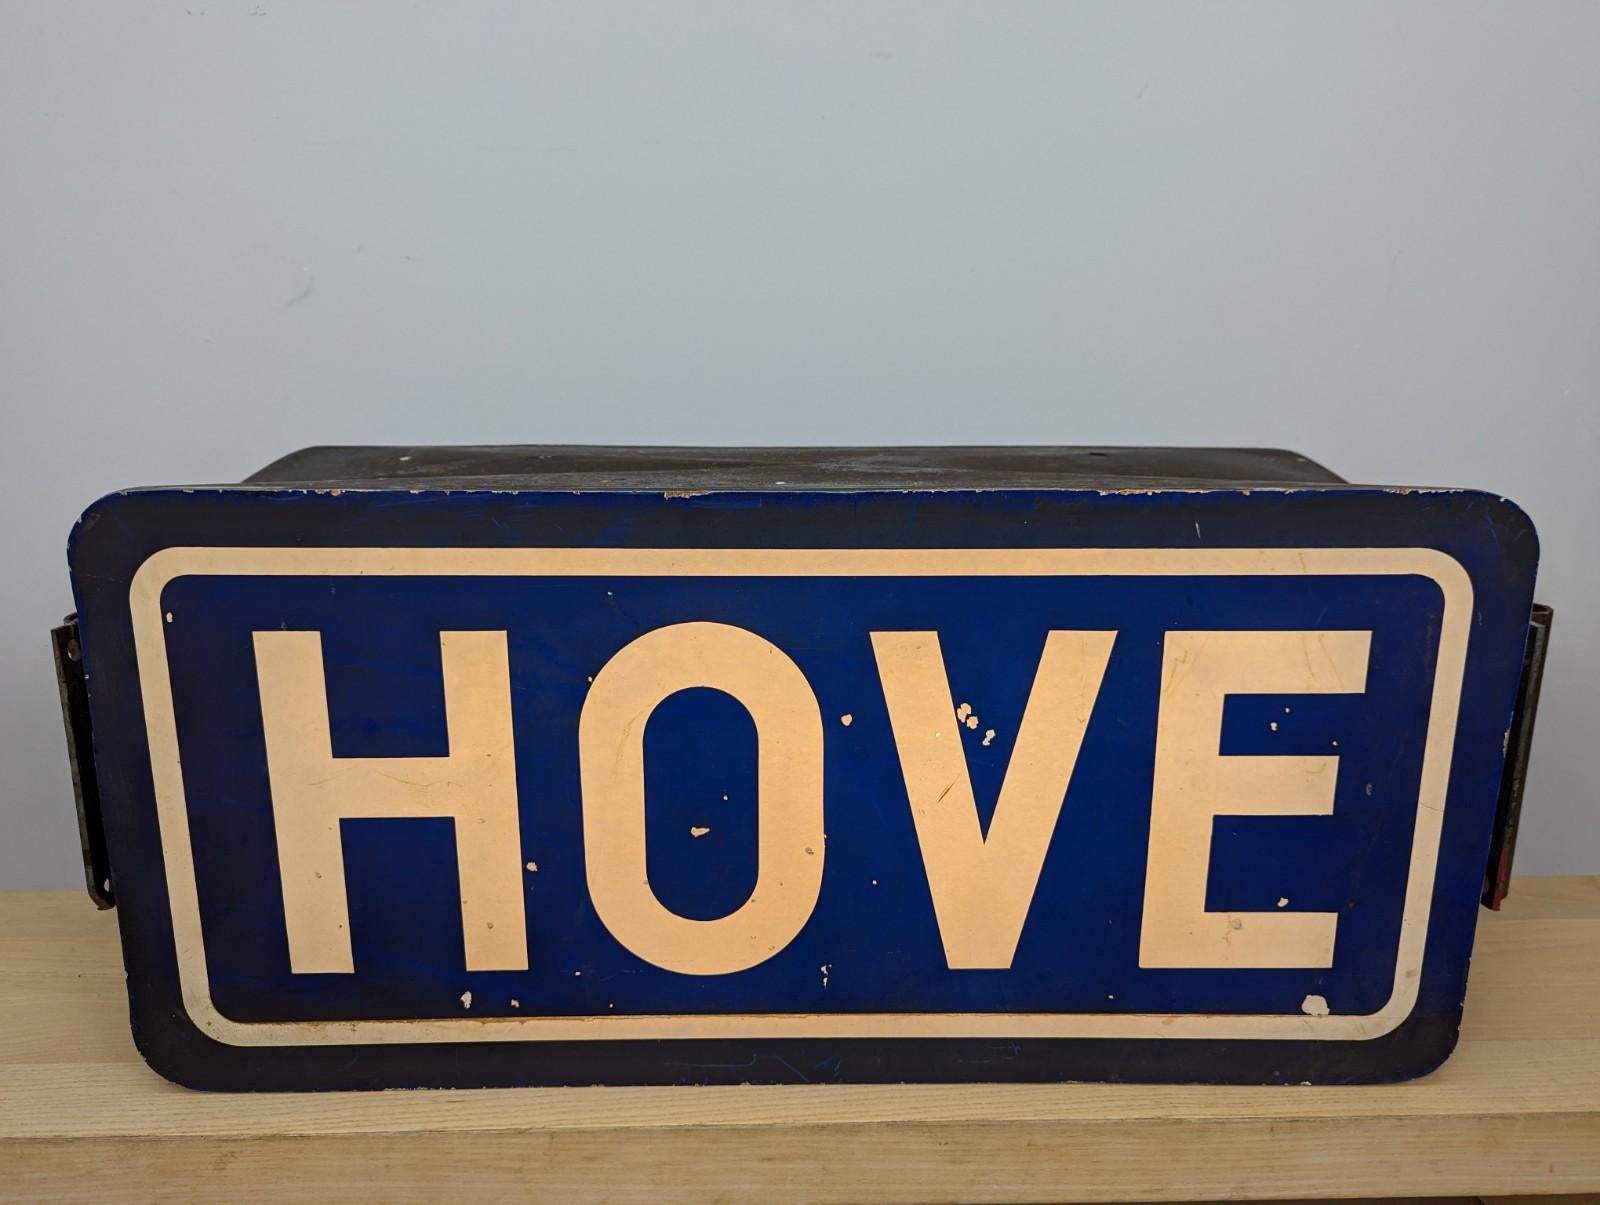 Large mid century vintage 'Hove' advertising light box.

The box is made from fiberglass and contains a modern LED light fitting.

The item has a great patina.